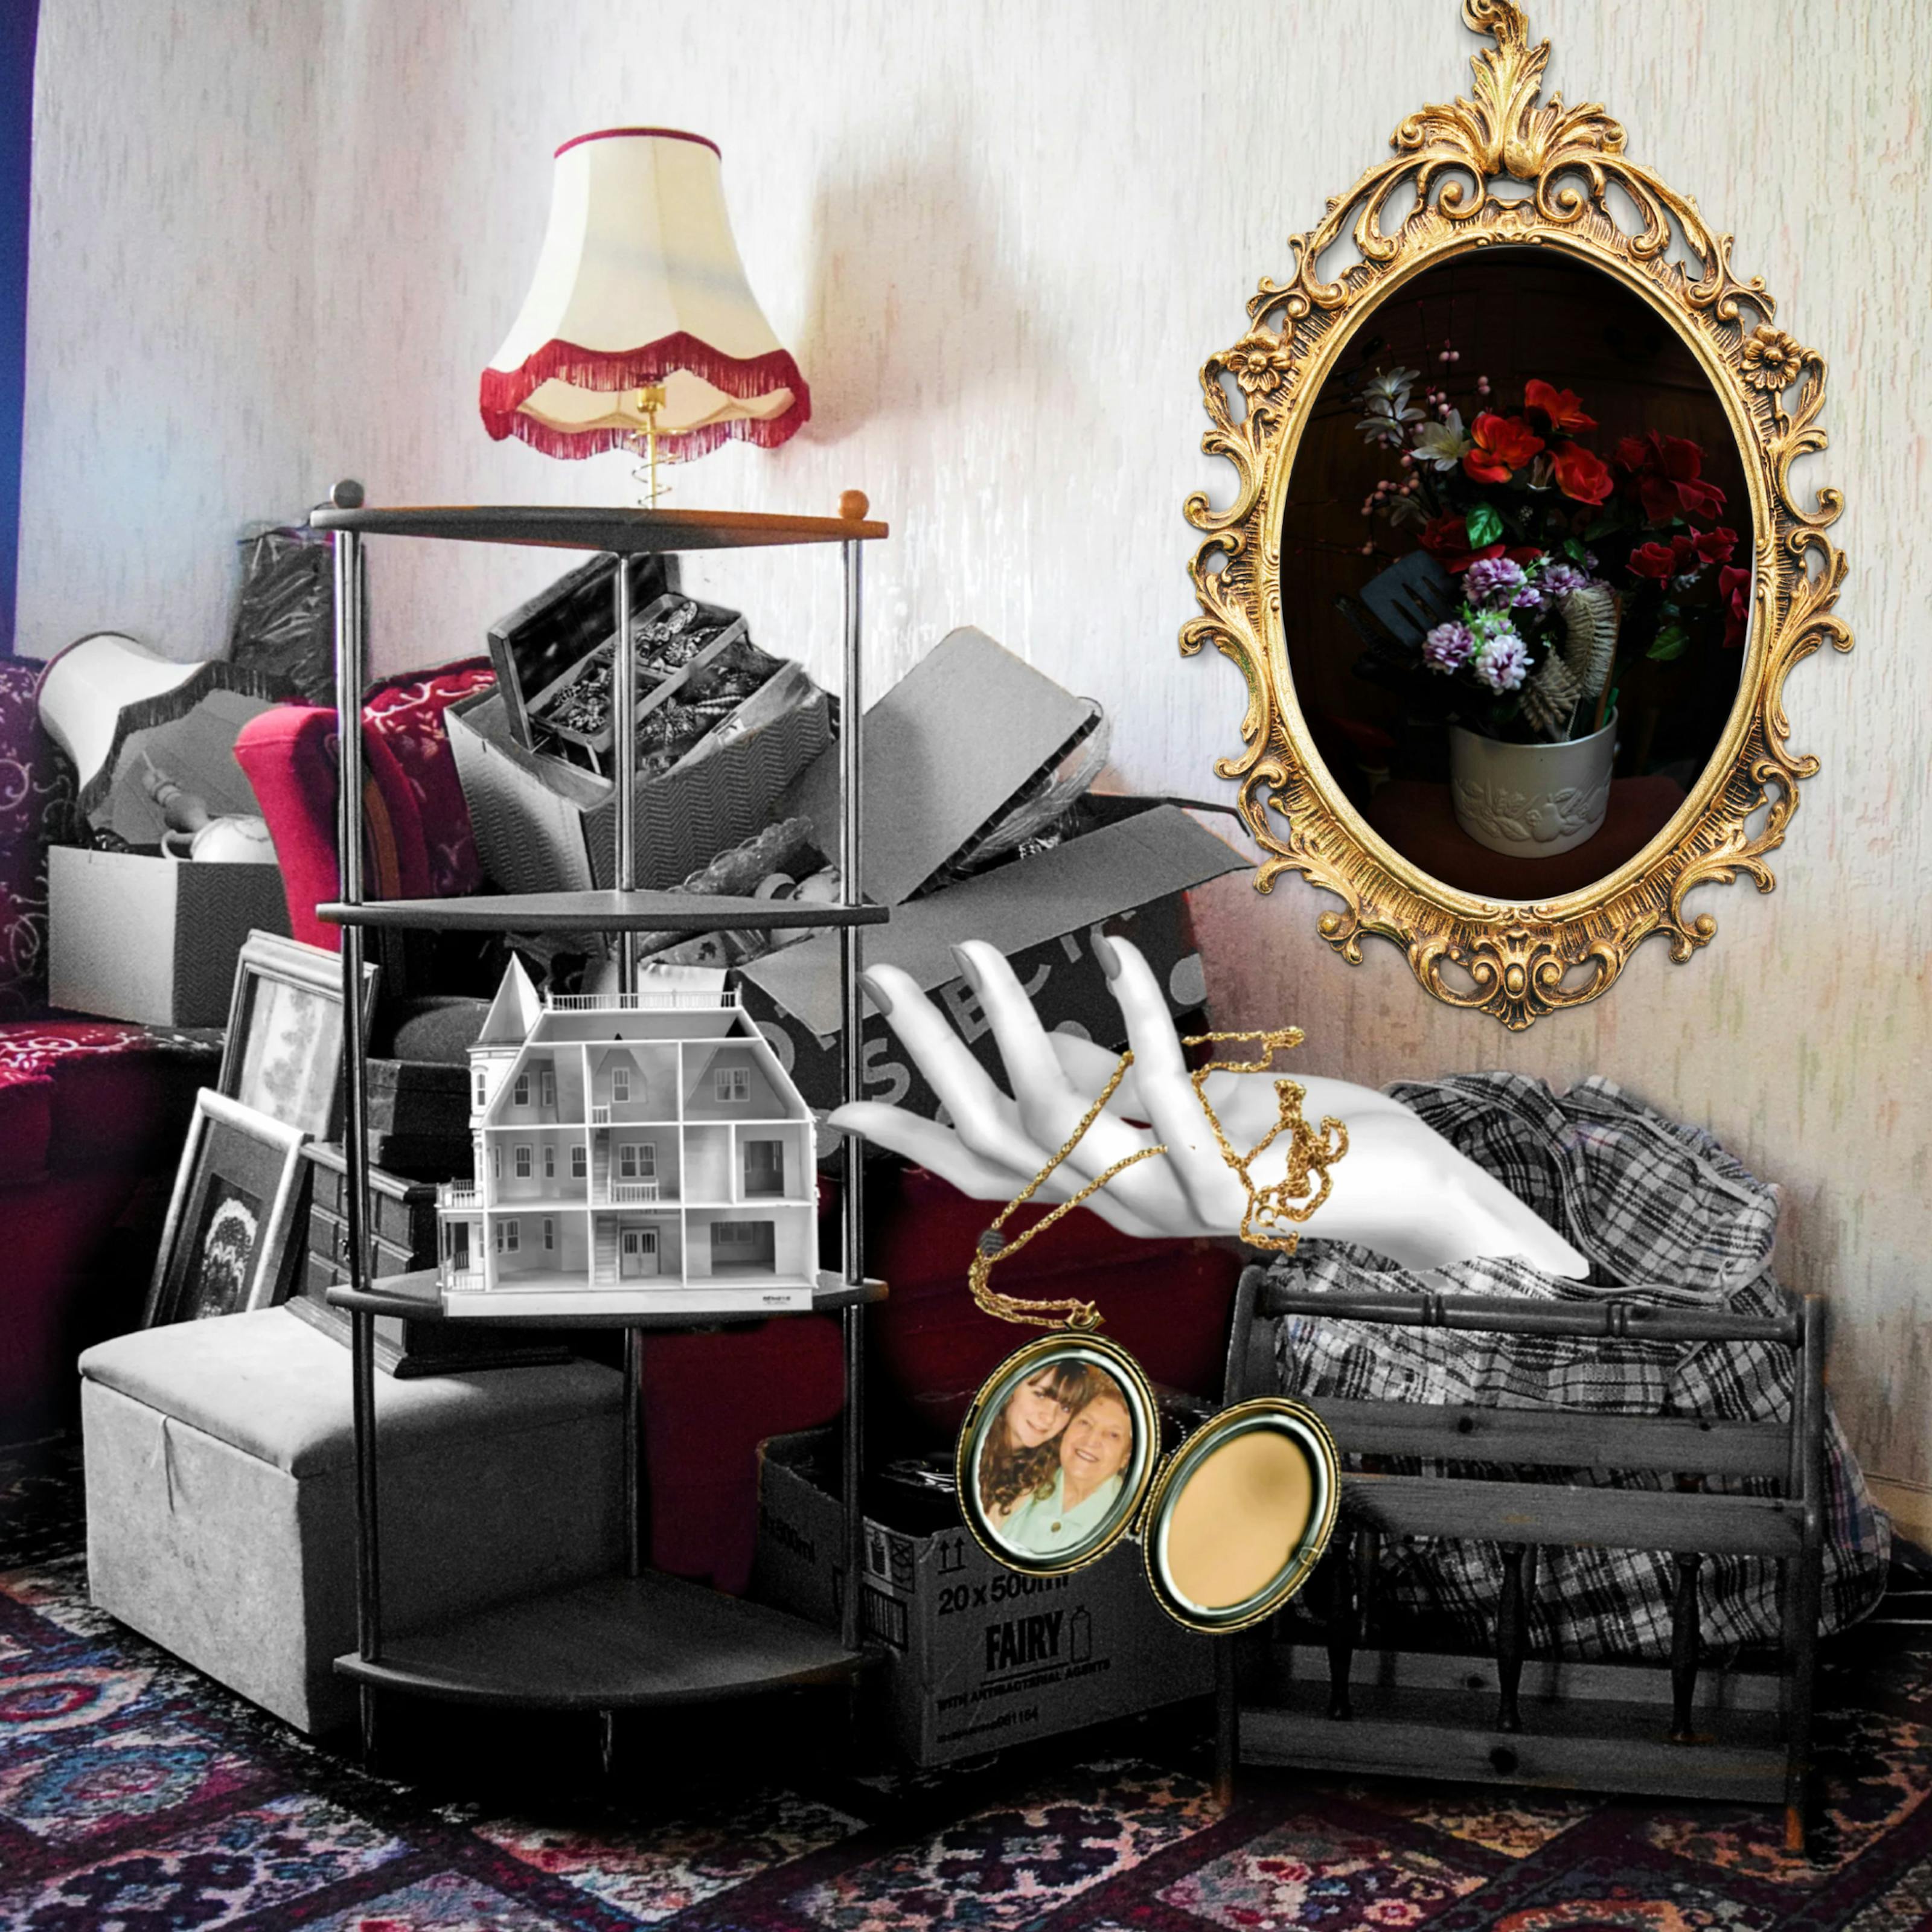 Colourful photograph with some coloured and black and white collage elements. The photo is of an empty living room with patterned off-white wallpaper, a red floral patterned sofa and a patterned carpet. There are pieces of black and white furniture in a pile next to and on top of the red sofa, including lamps, picture frames, storage bags, jewellery boxes and a shelving unit. On the shelving unit is a three story dollhouse which is empty. A black and white mannequin hand is shown coming out of a storage bag, and laced between its fingers is a golden pendant which is open and contains a photo of a girl and her grandma. On the wall is a ornate golden photo frame that contains a photo of a vase of different coloured flowers and a hairbrush. 